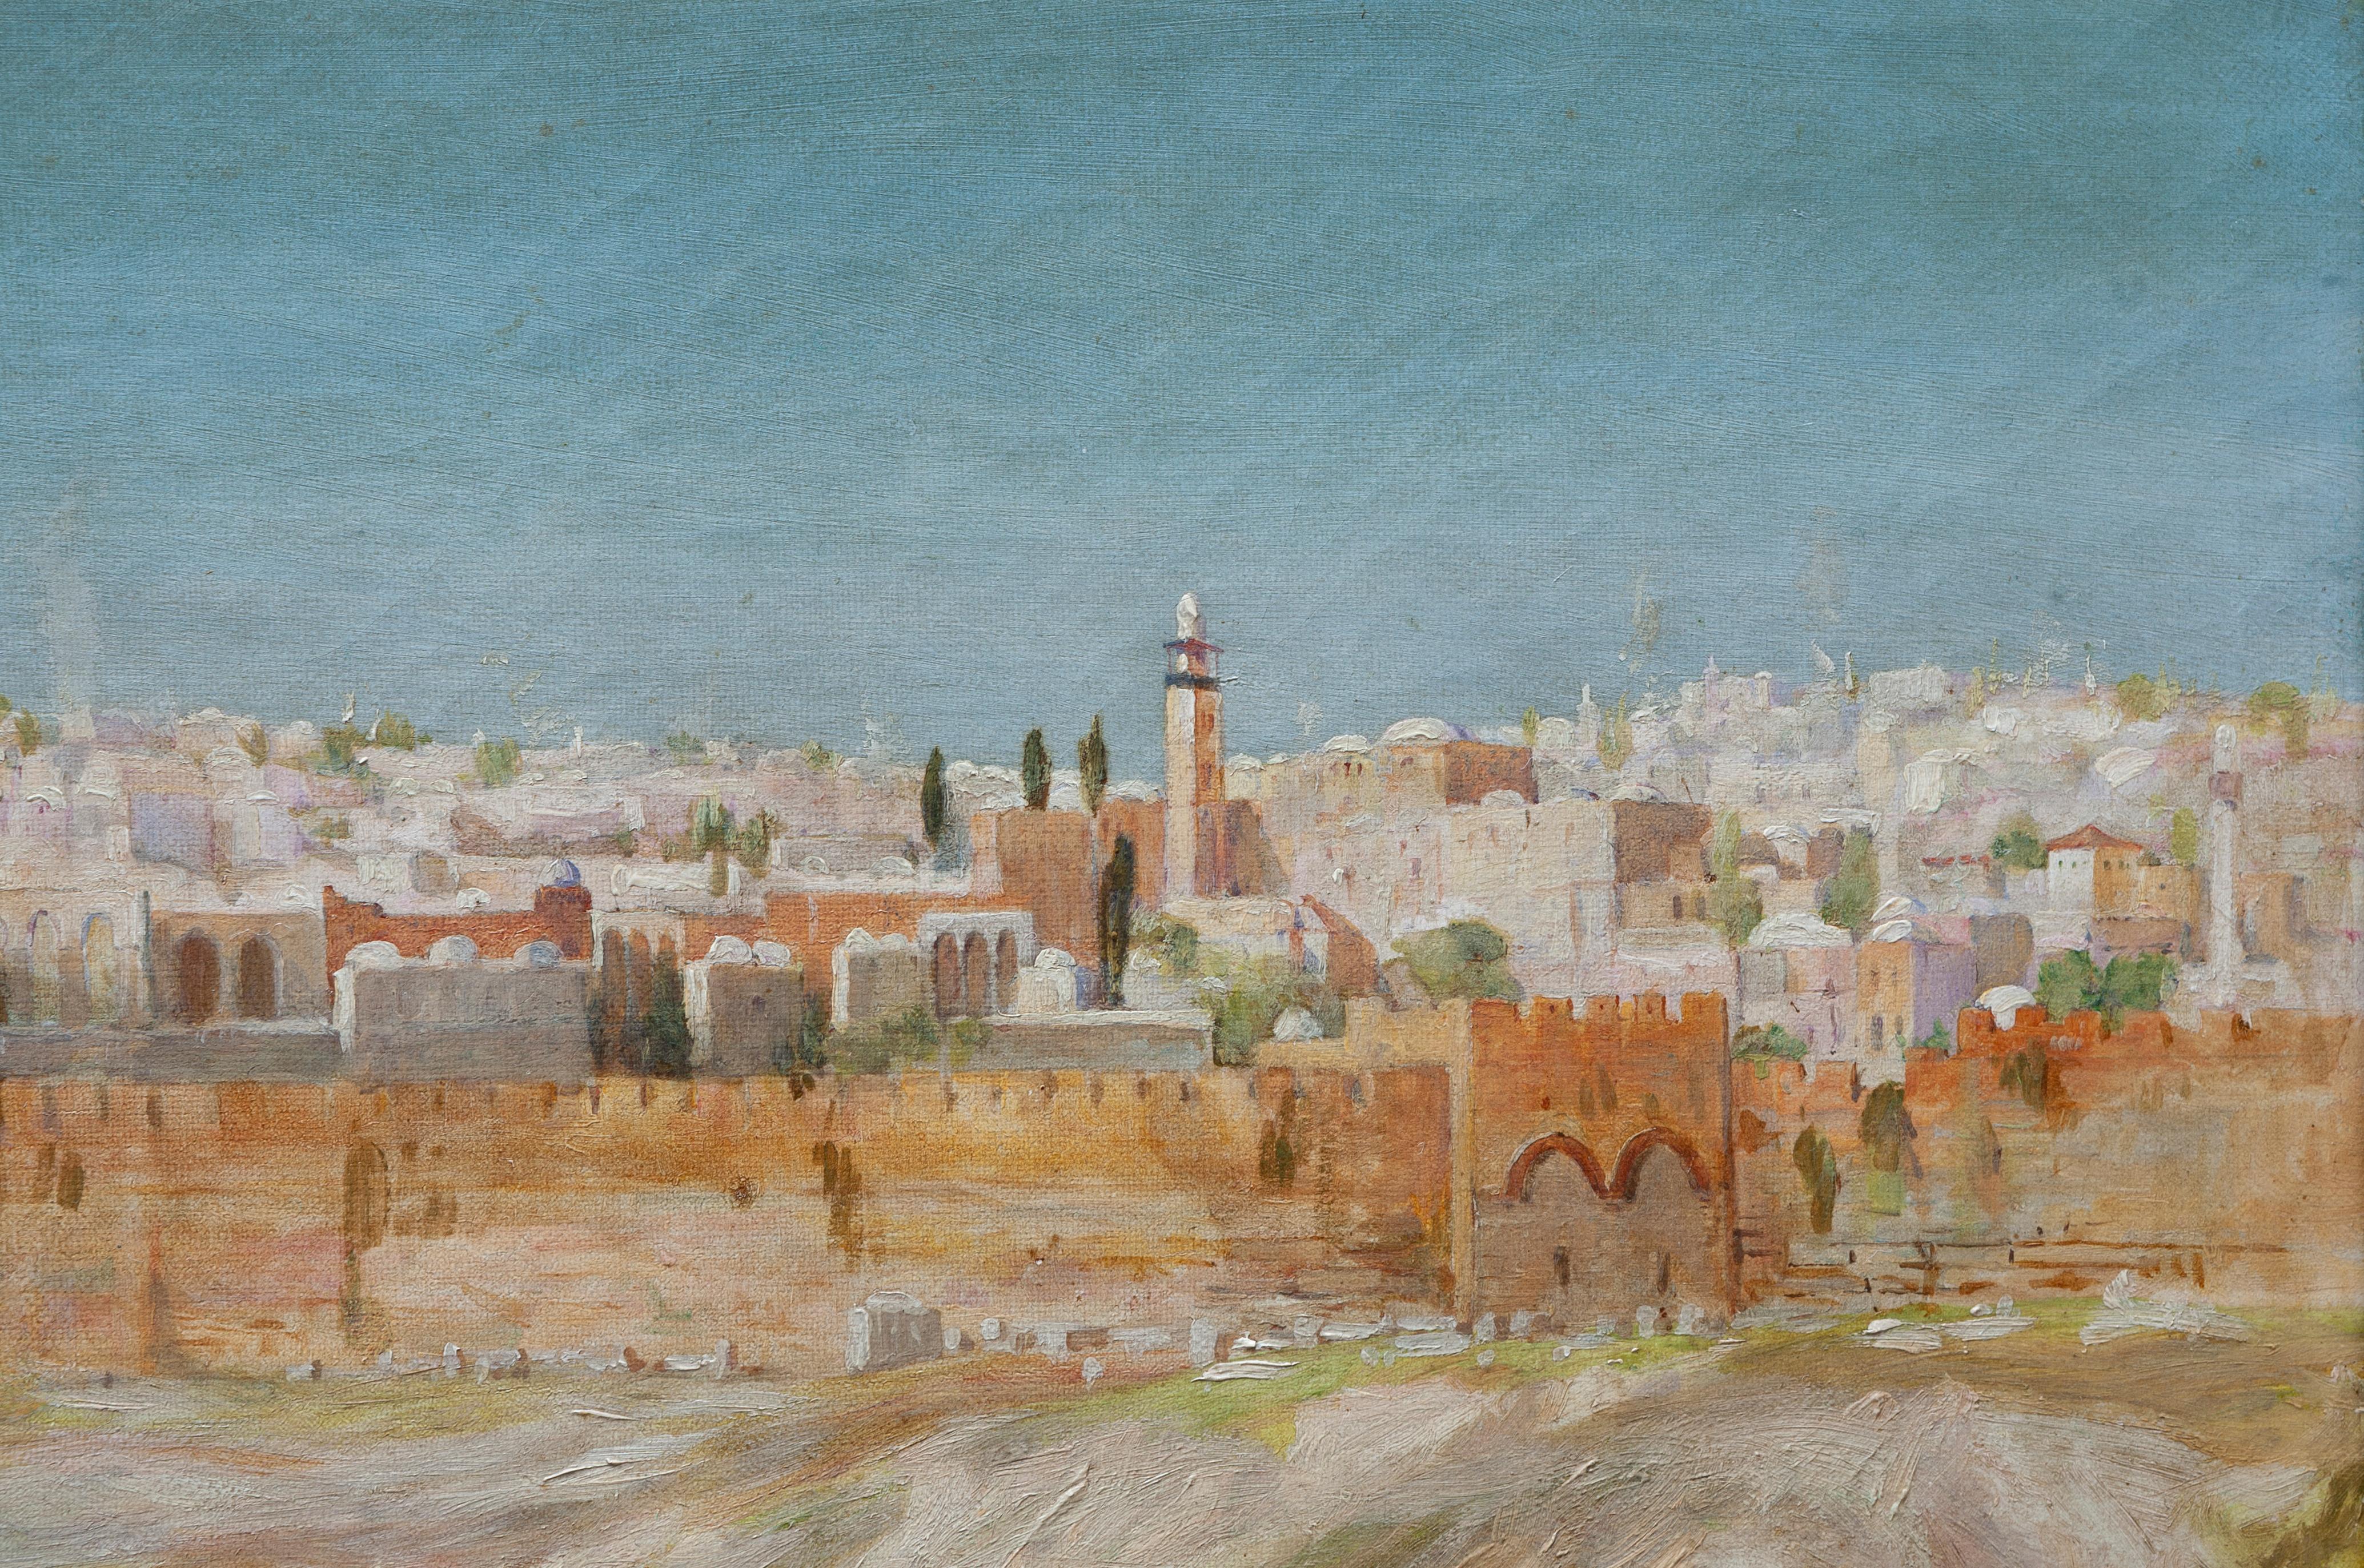 Henry Andrew Harper (Blunham, 1835 - London, 1900)
View of Jerusalem from the Mount of Olives

Signed lower right and dated 1890
Oil on canvas in gilded frame
Canvas measures 63 x 95 cm - (96 x 129 cm including the frame) 

Henry Andrew Harper was a